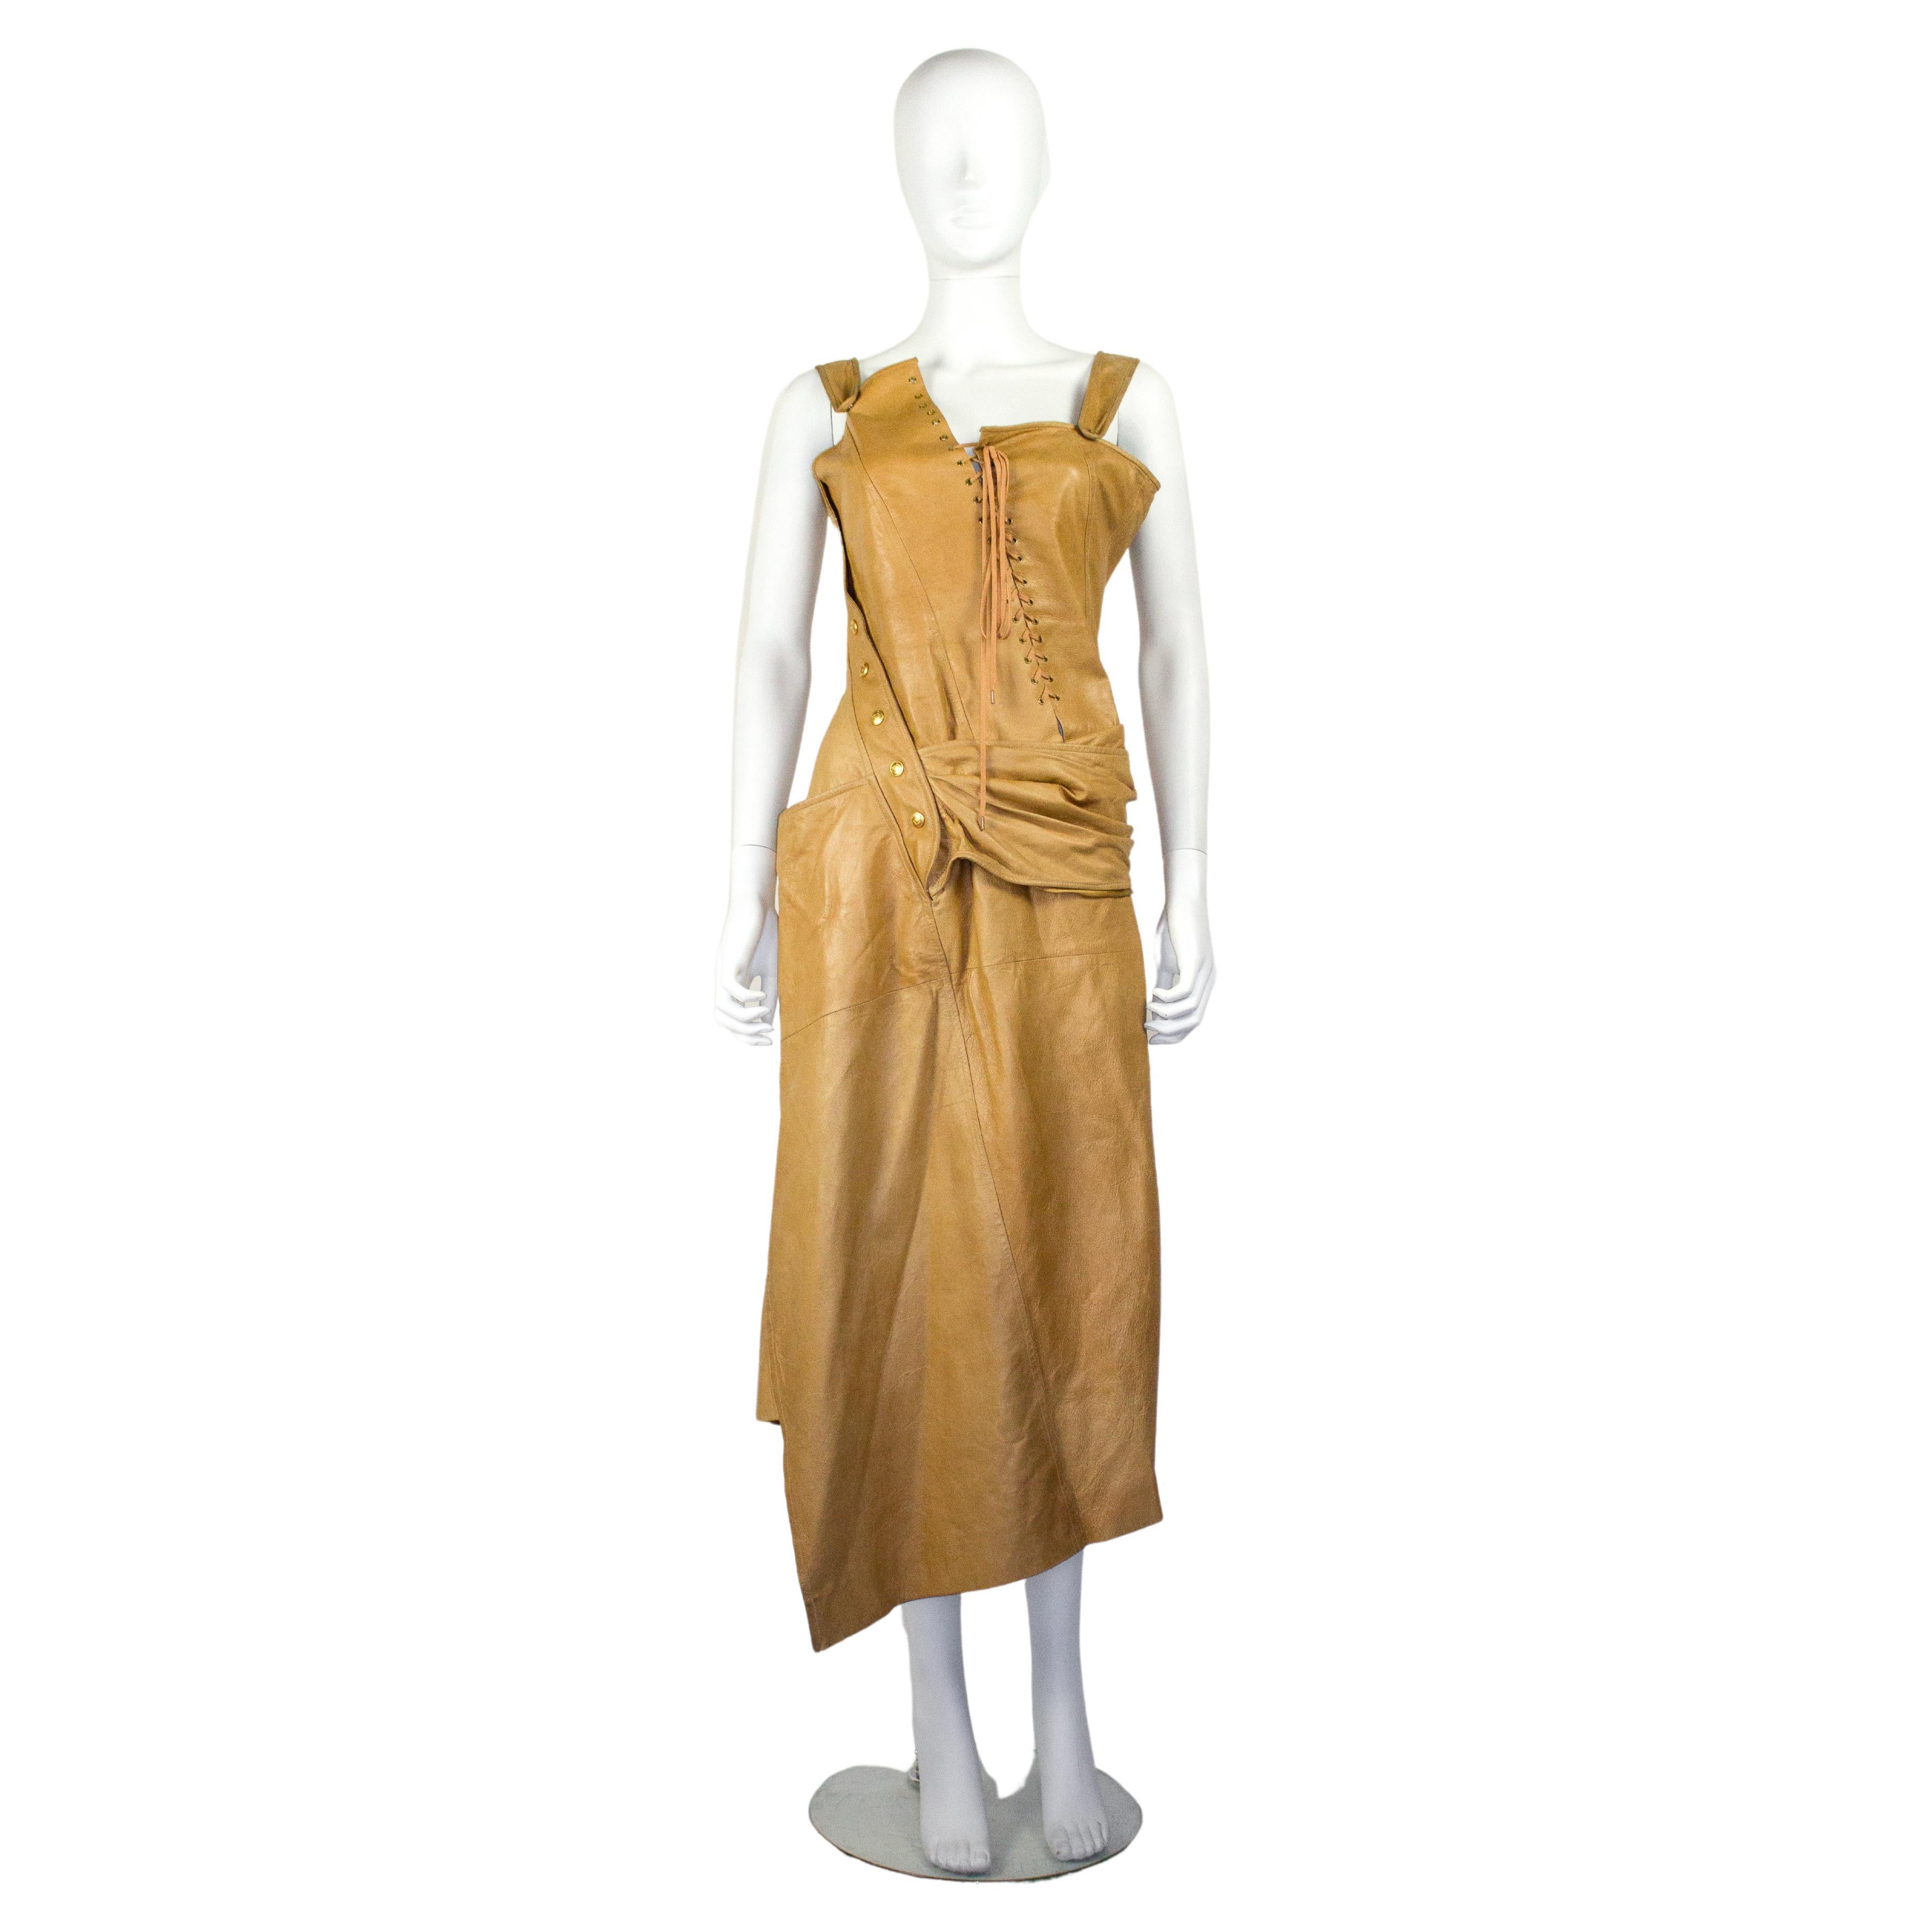 Christian Dior by John Galliano Leather Corset Dress S/S 2000 